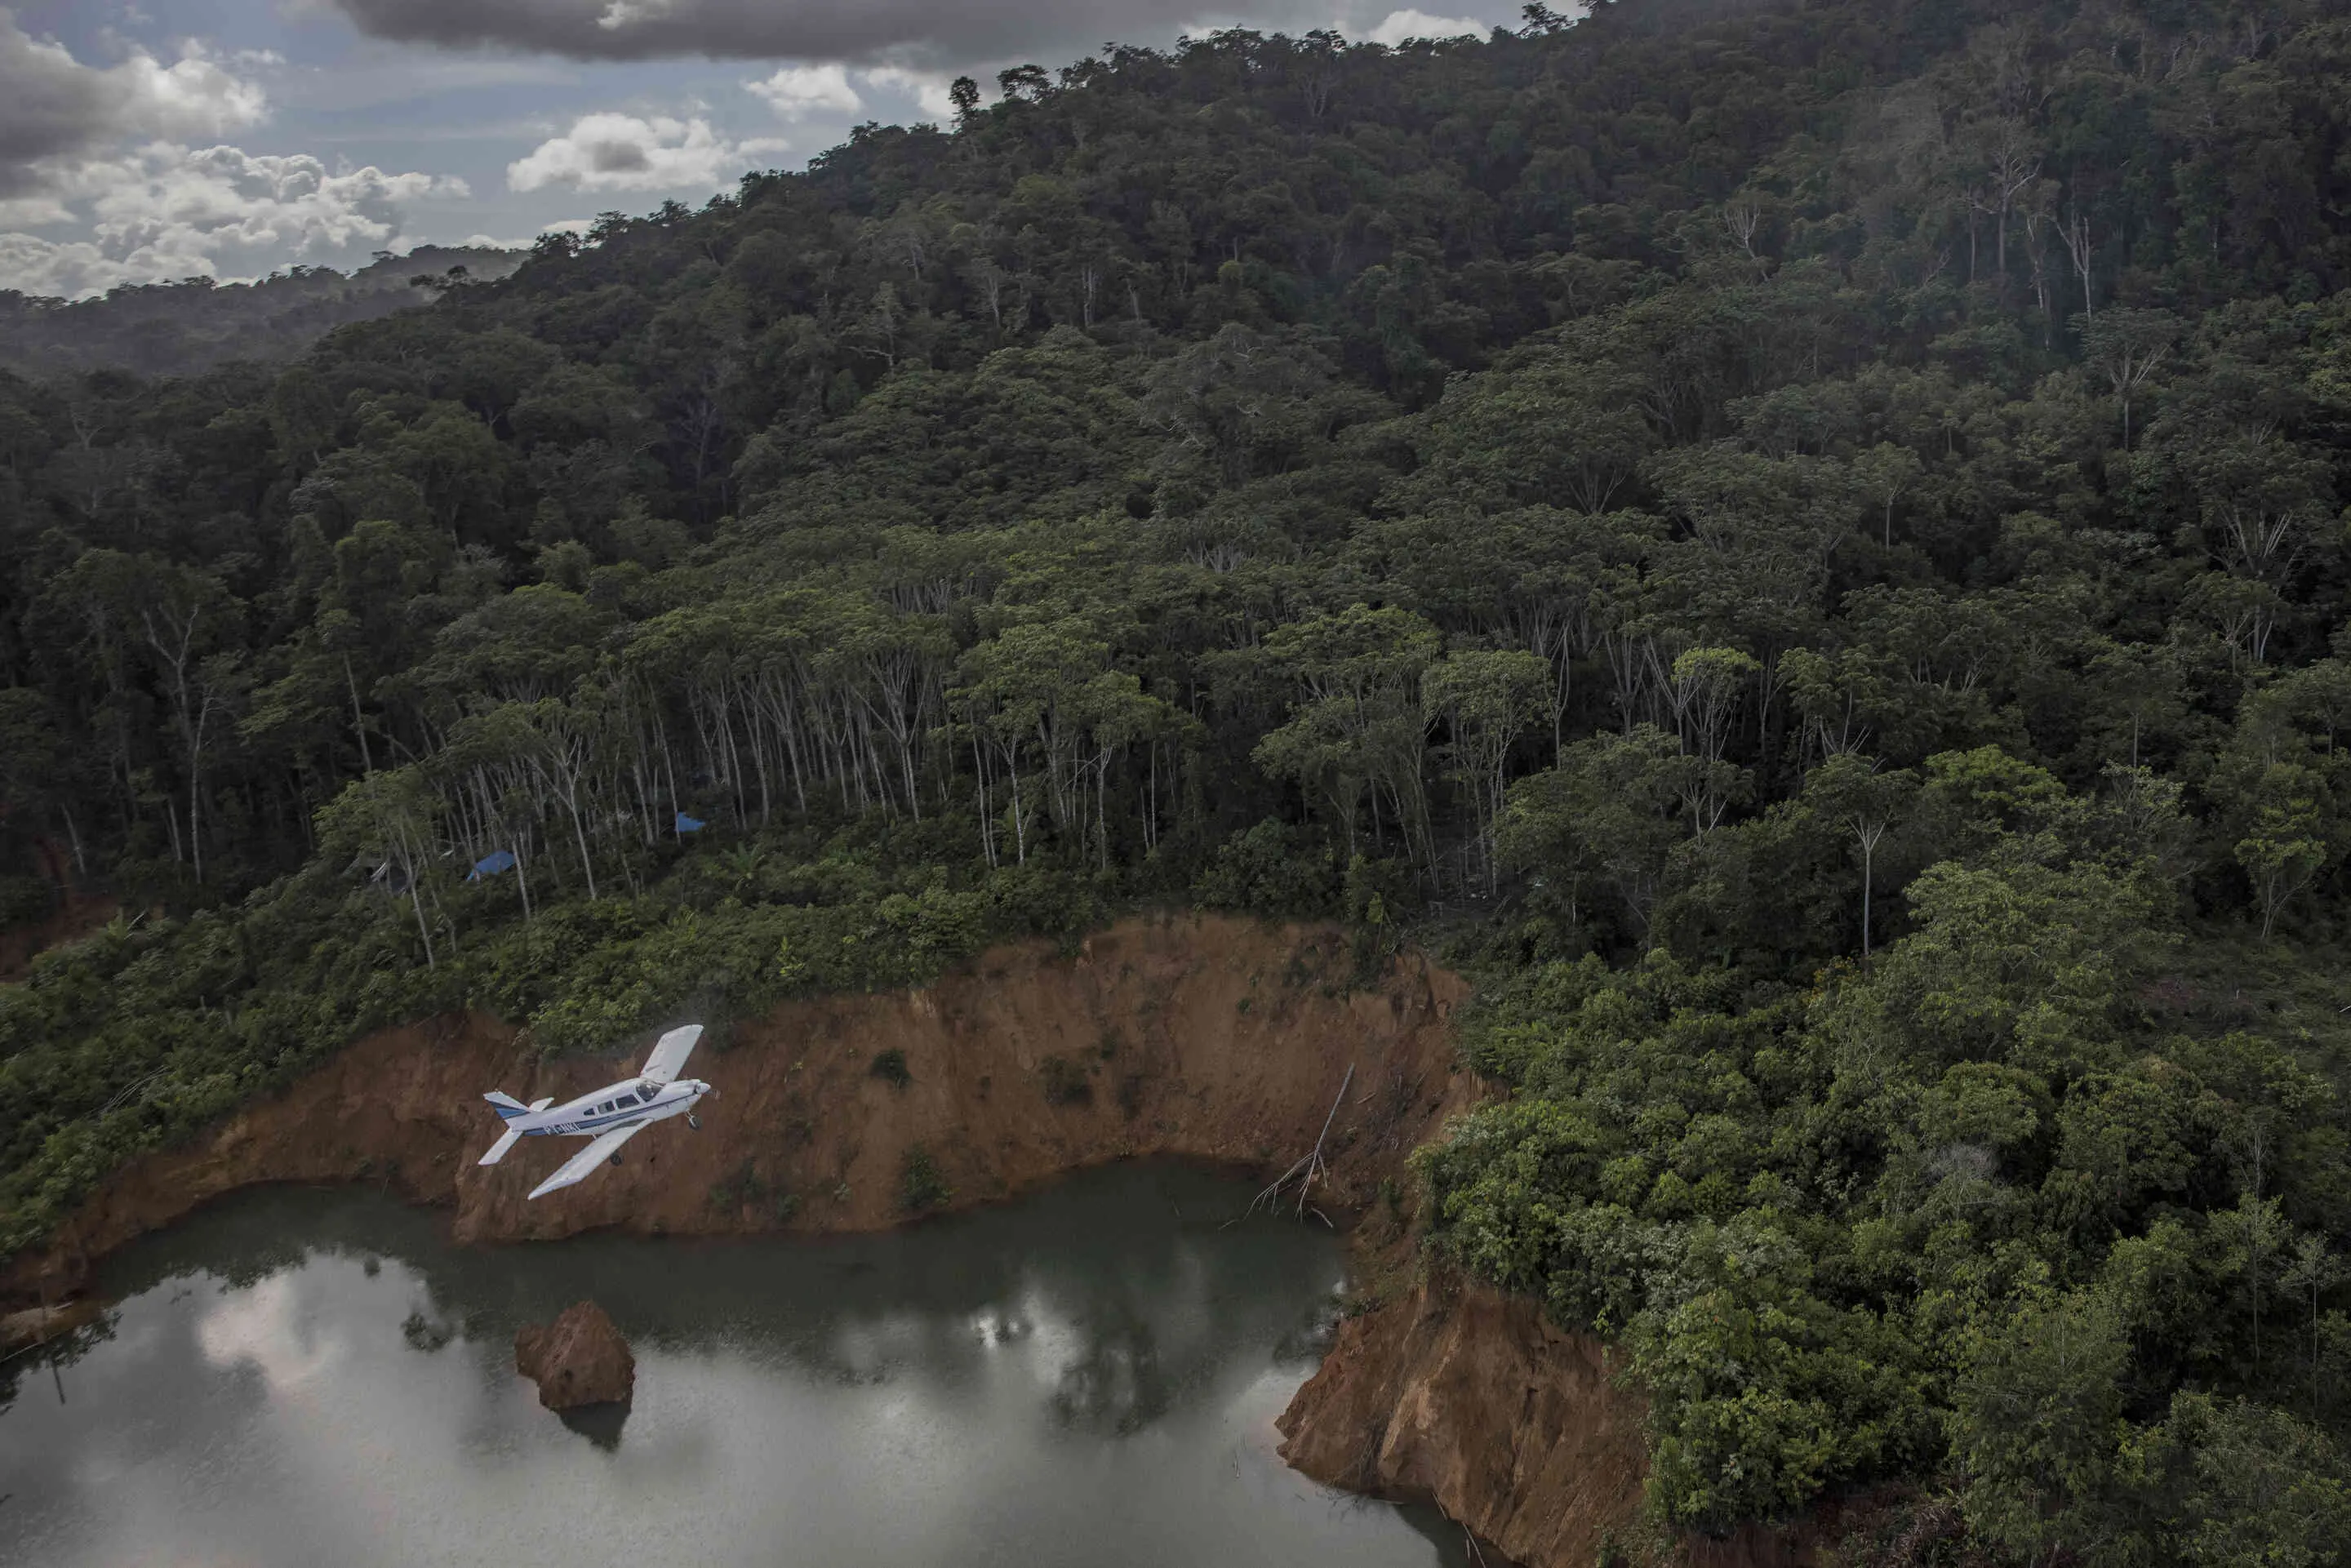 A once-remote patch of rainforest is now packed with migrants